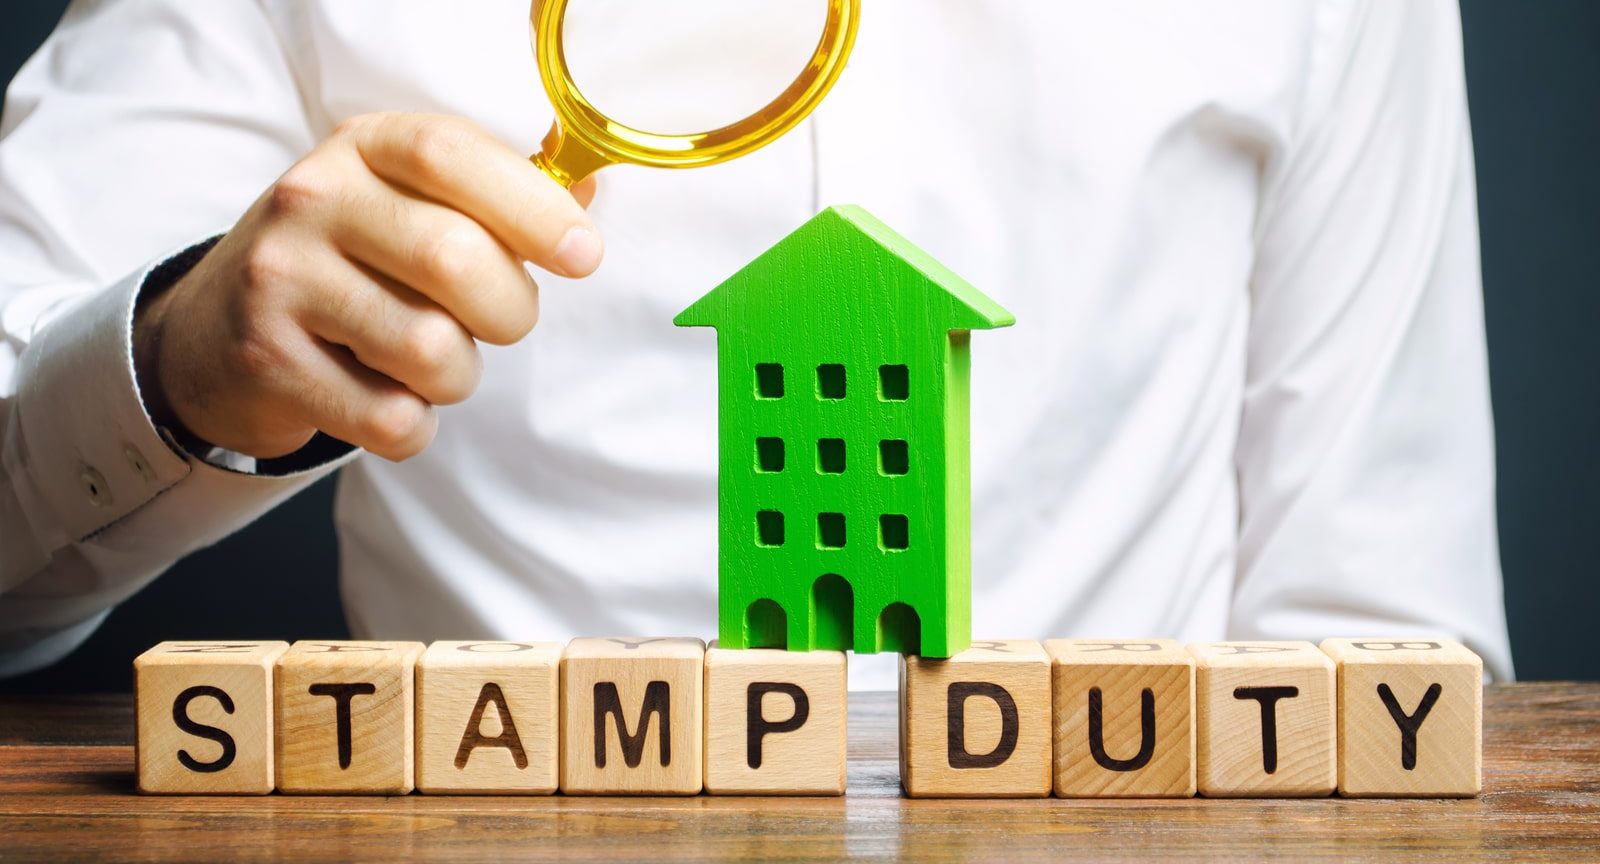 Stamp Duty And Tax On Property Reduced  M. Meilak & Associates